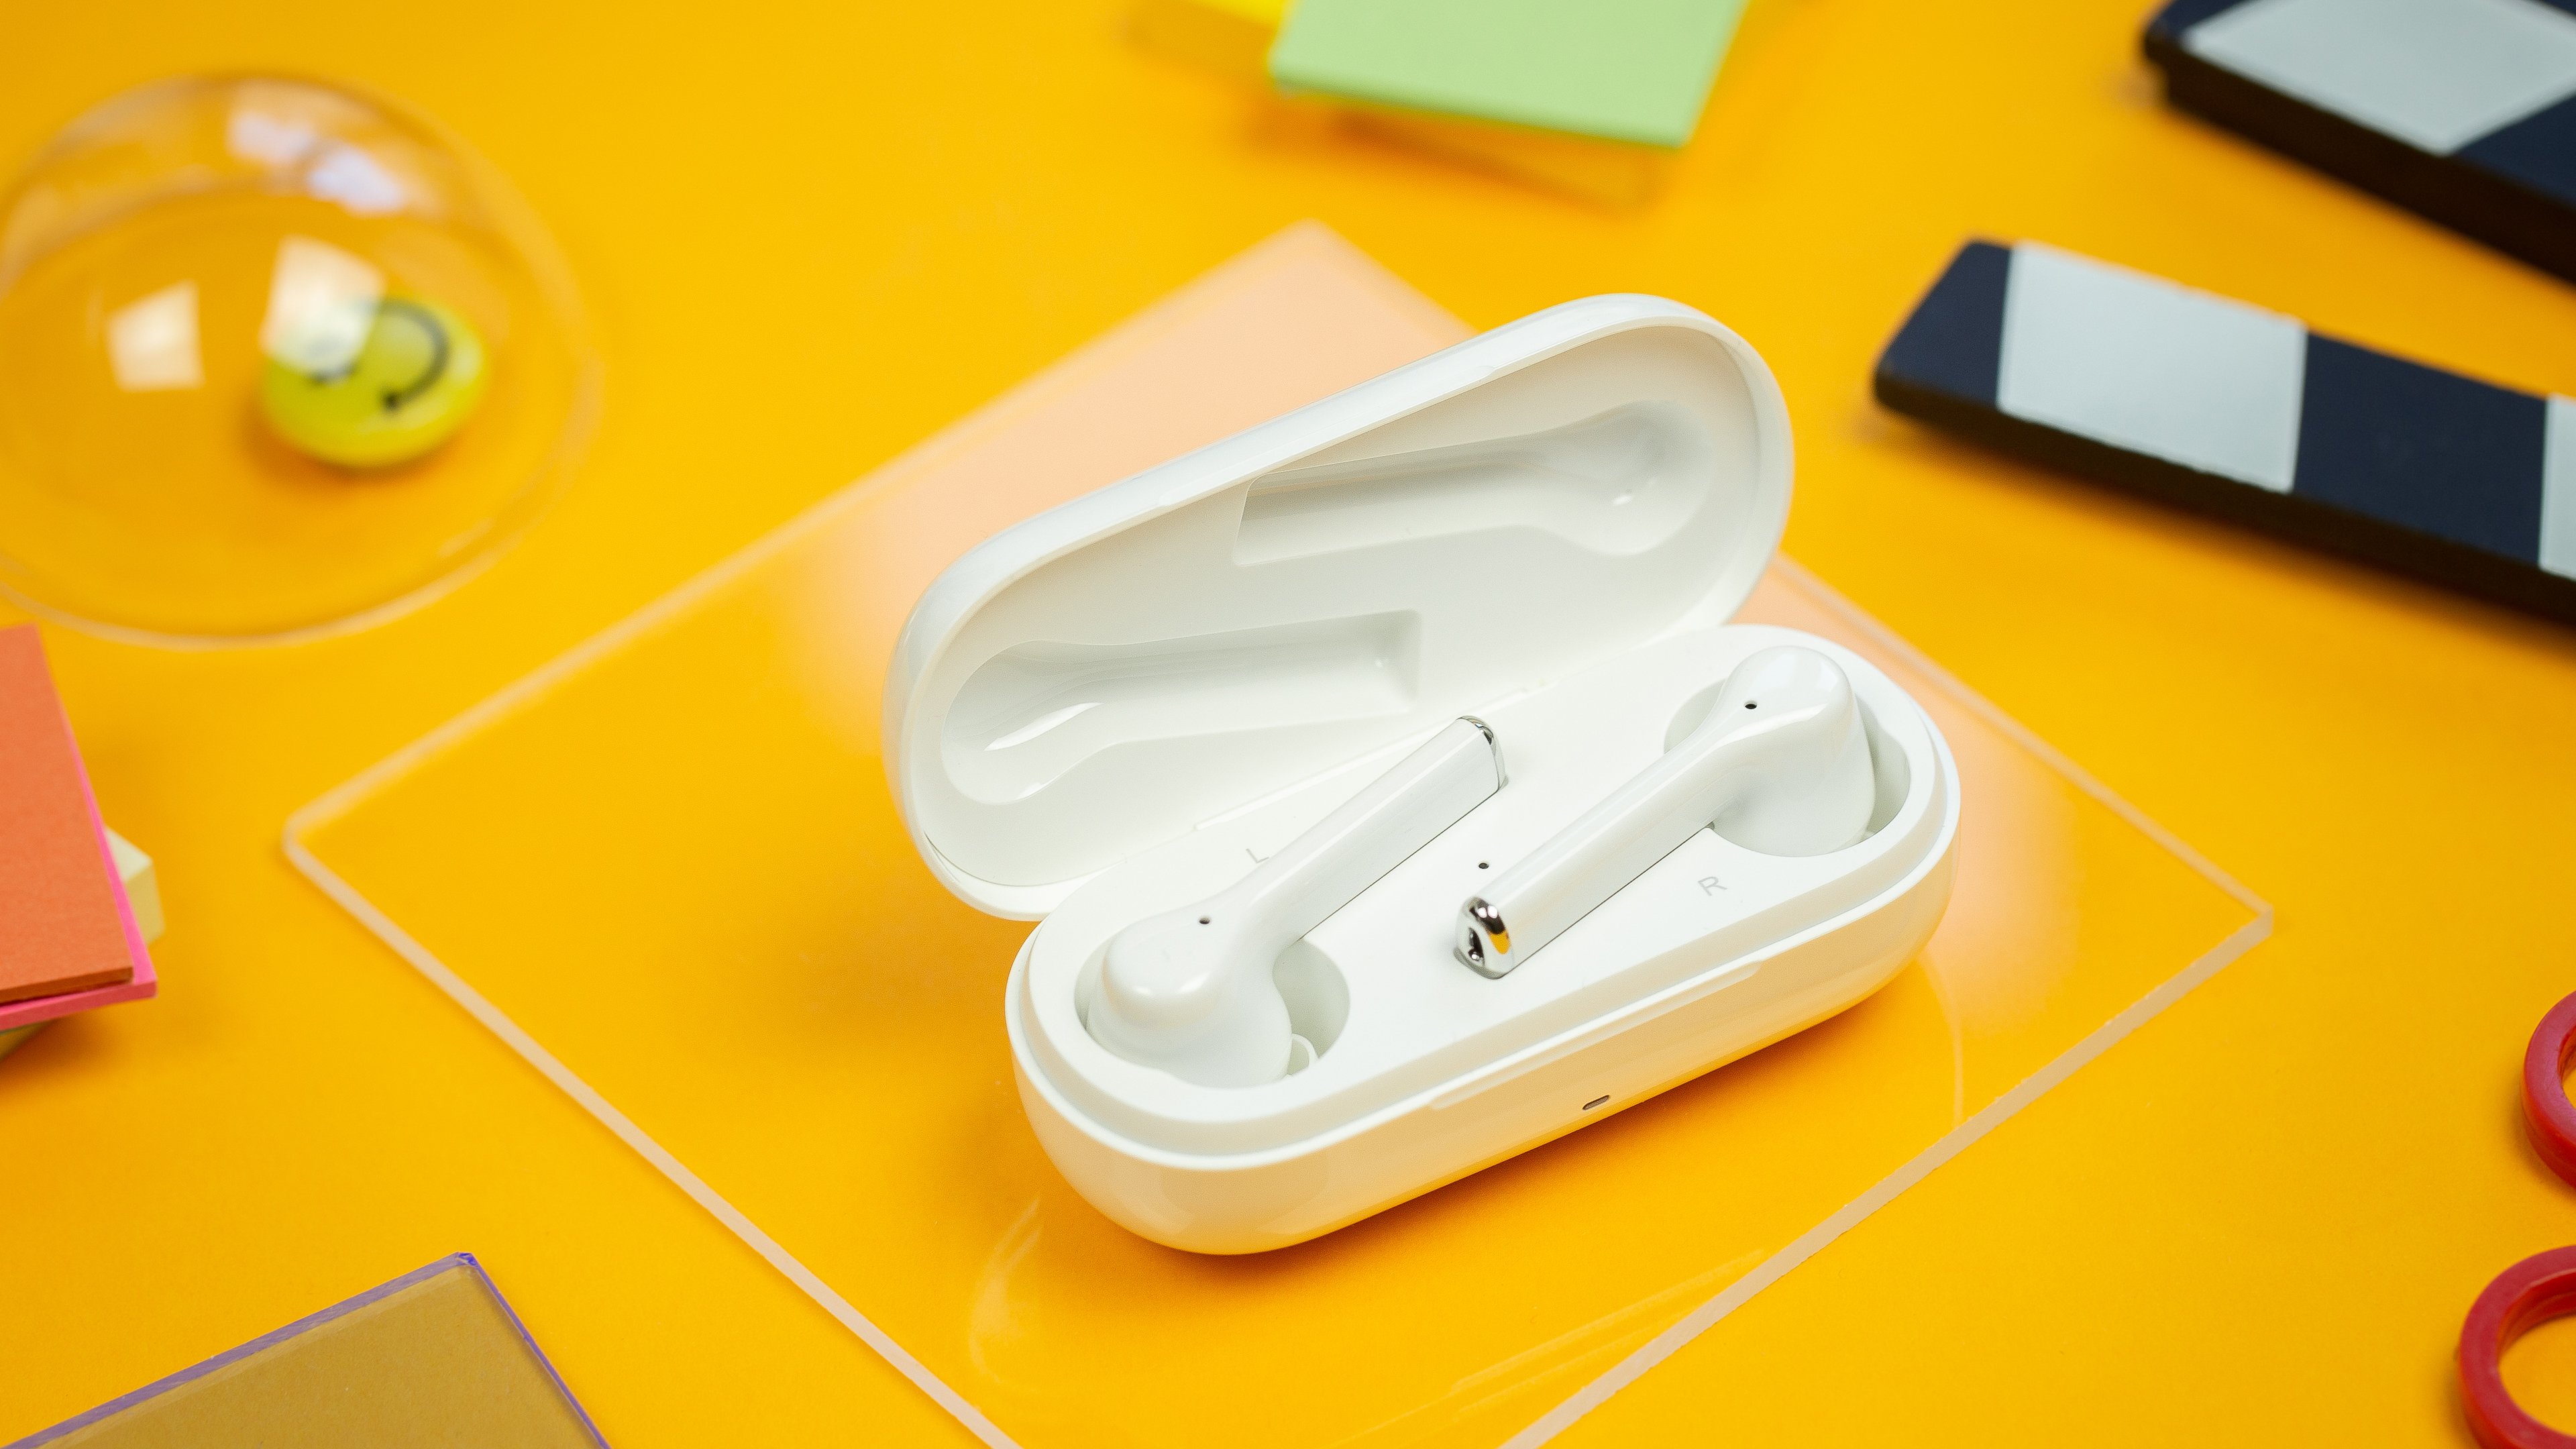 Huawei FreeBuds Pro 2 review: Android's AirPods Pro rivals